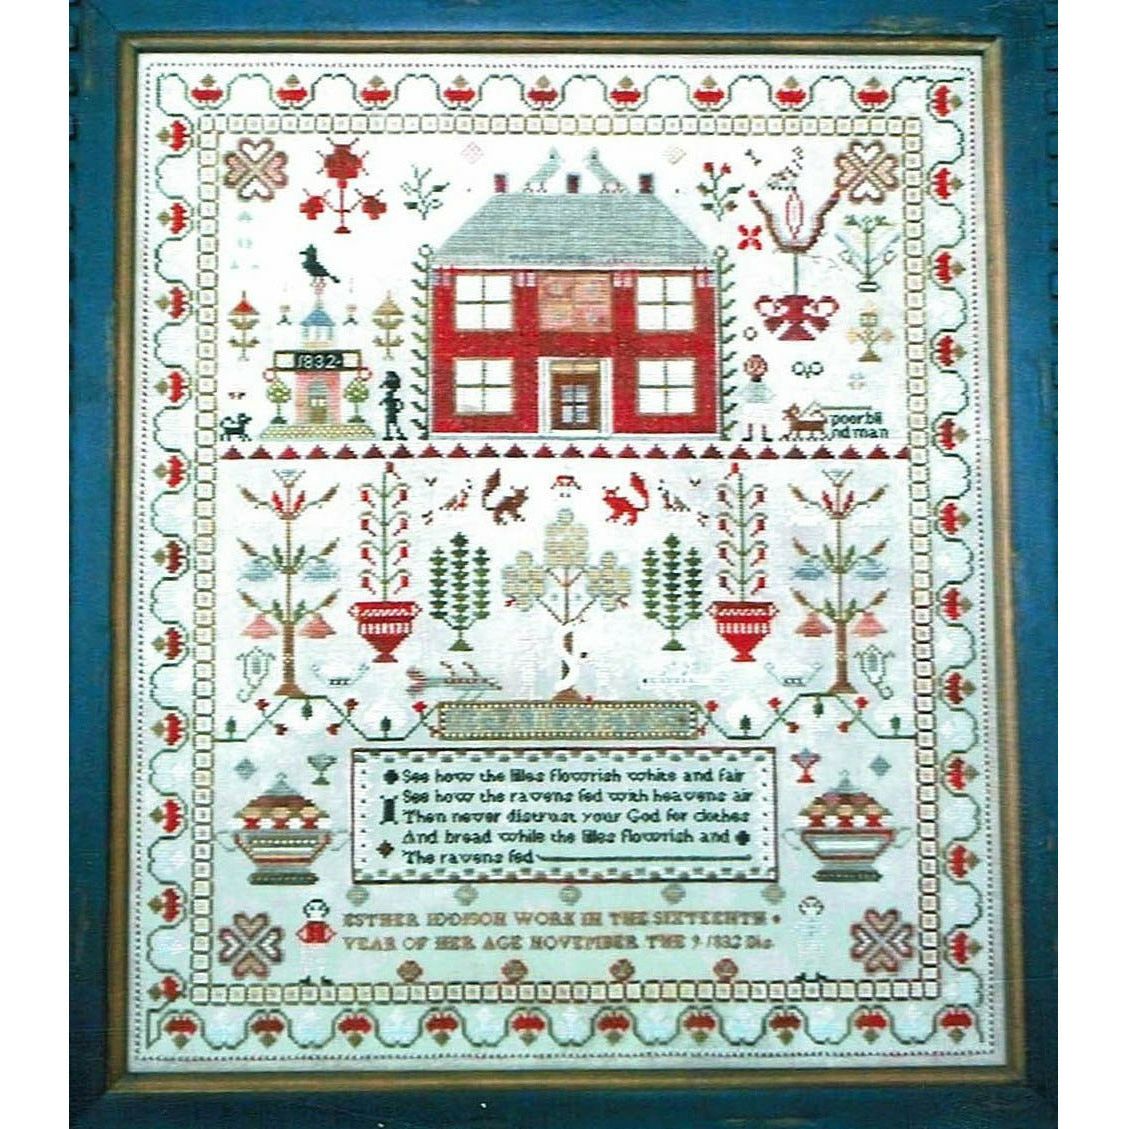 Chessie & Me ~ Esther Iddison 1832 Reproduction Sampler Pattern